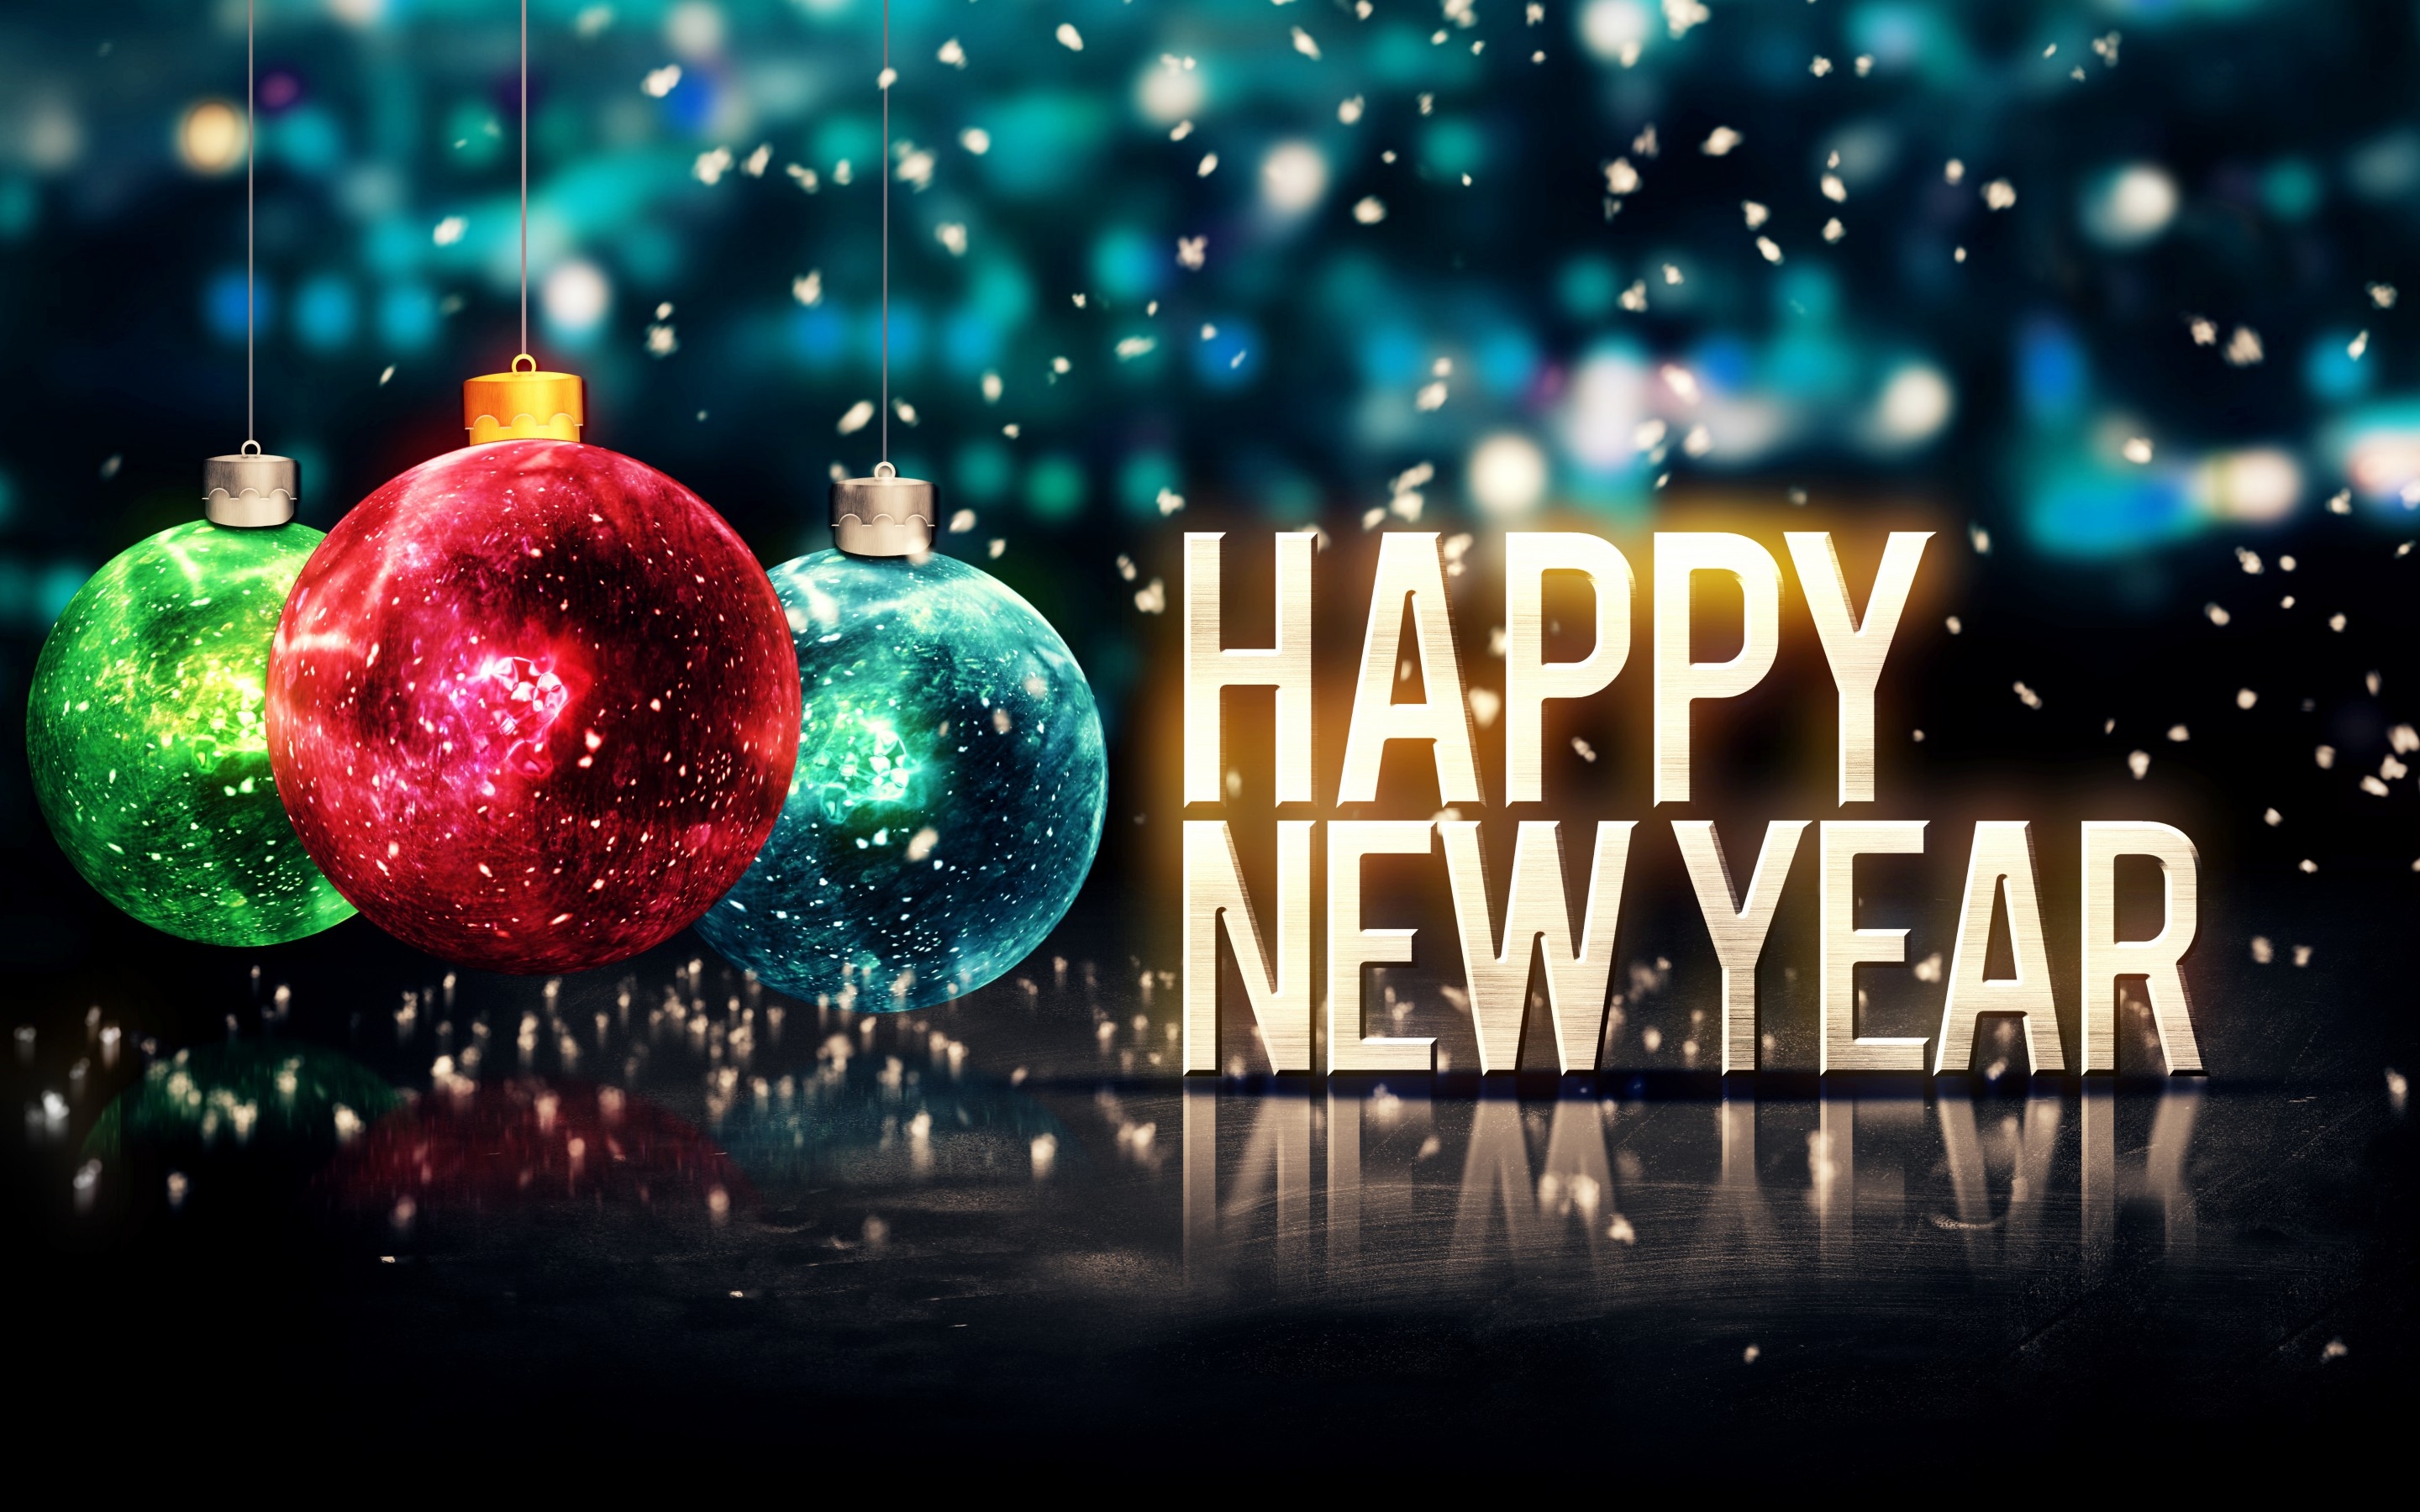 Happy New Year Ornament for 2880 x 1800 Retina Display resolution